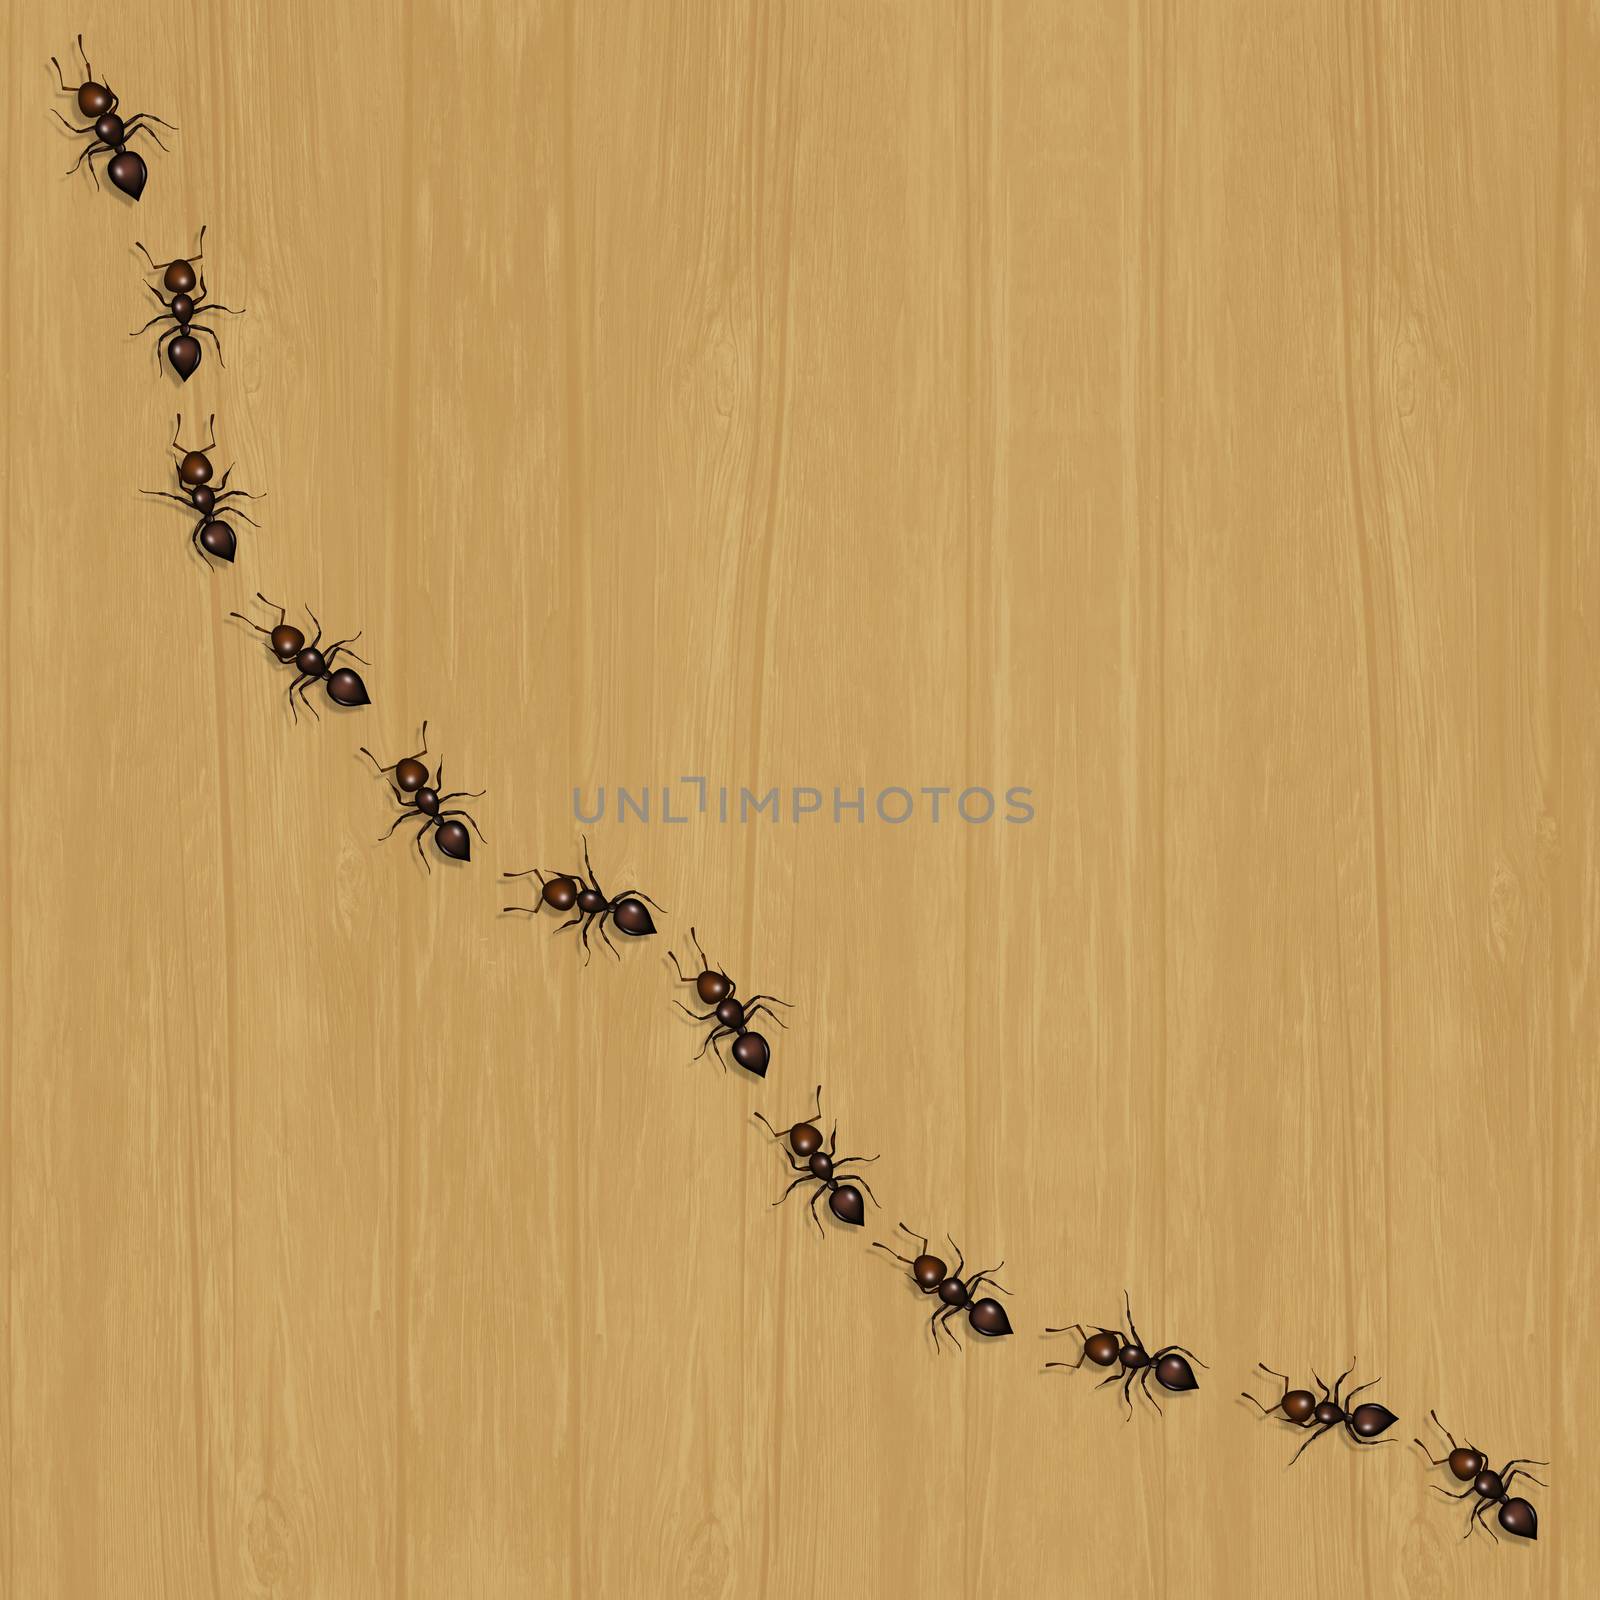 illustration of ants on the floor by adrenalina